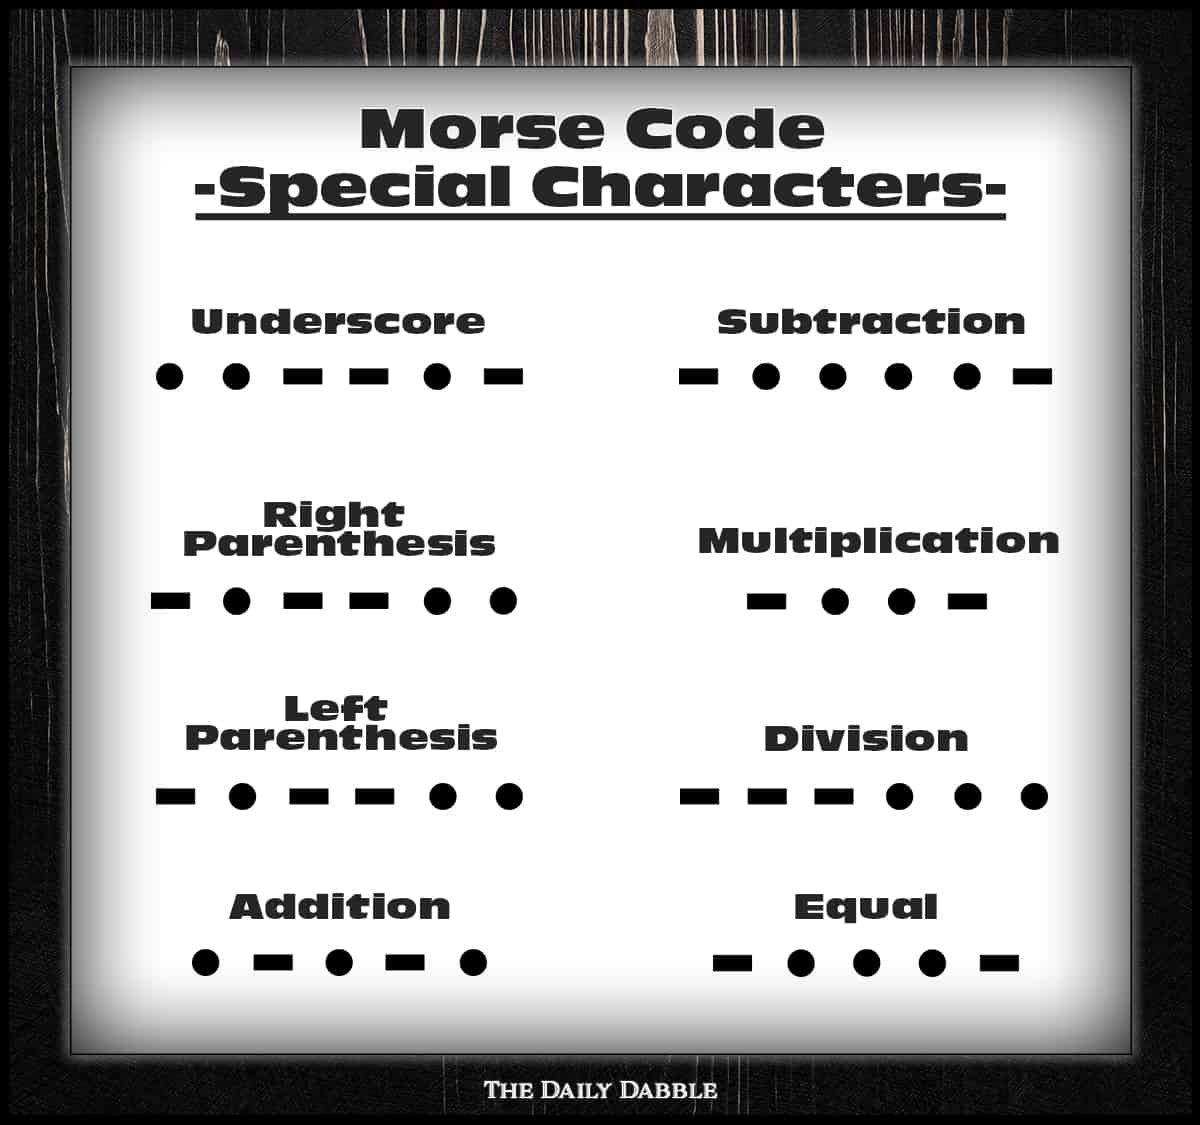 Complete chart of all Morse code special characters!